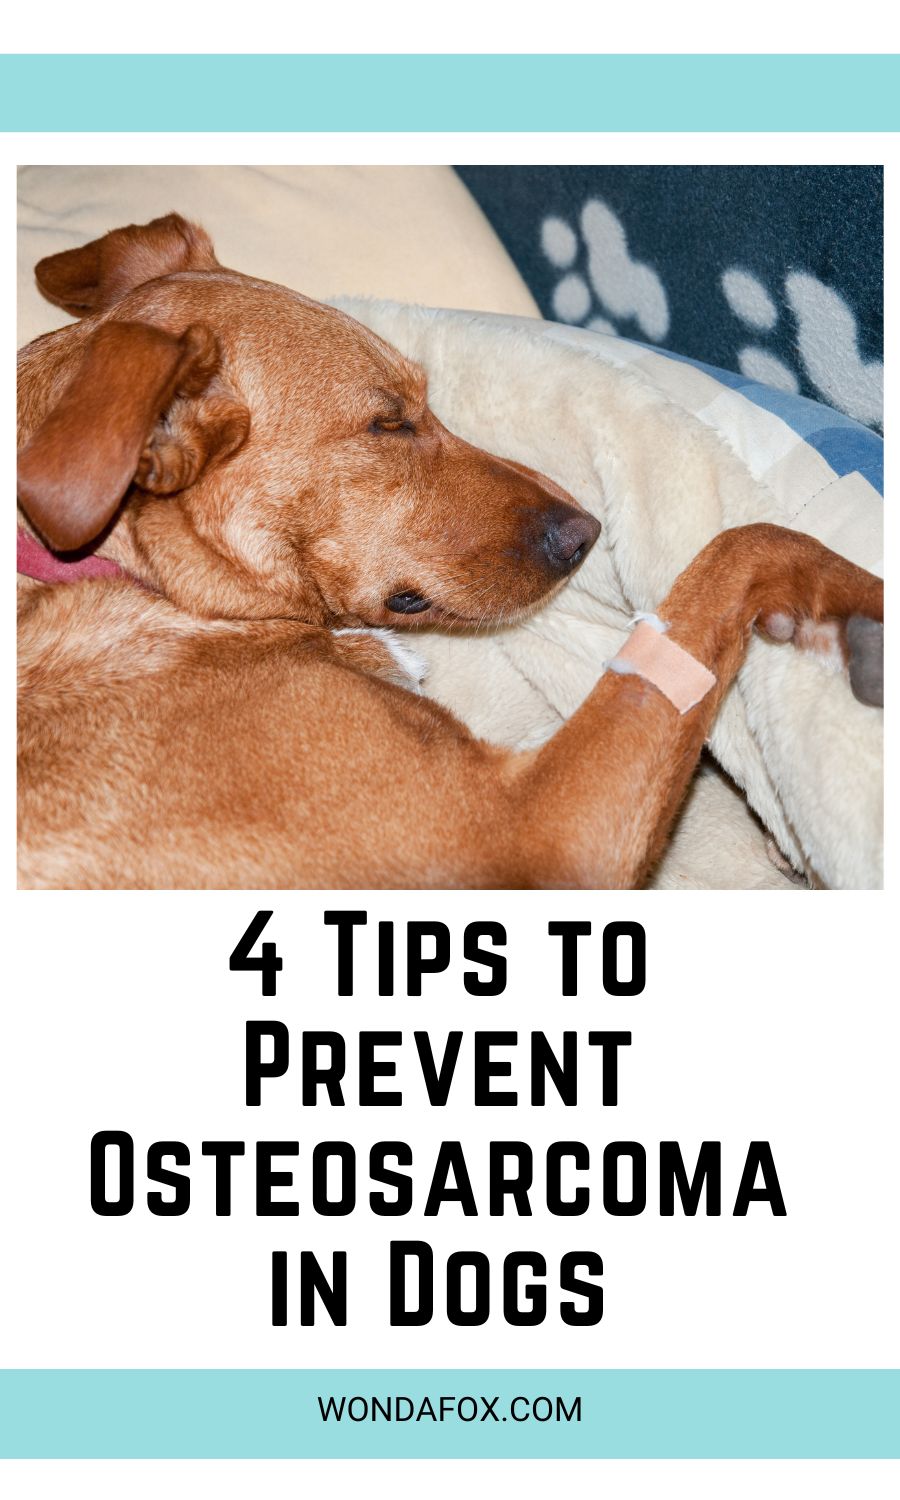 Tips to Prevent Osteosarcoma in Dogs